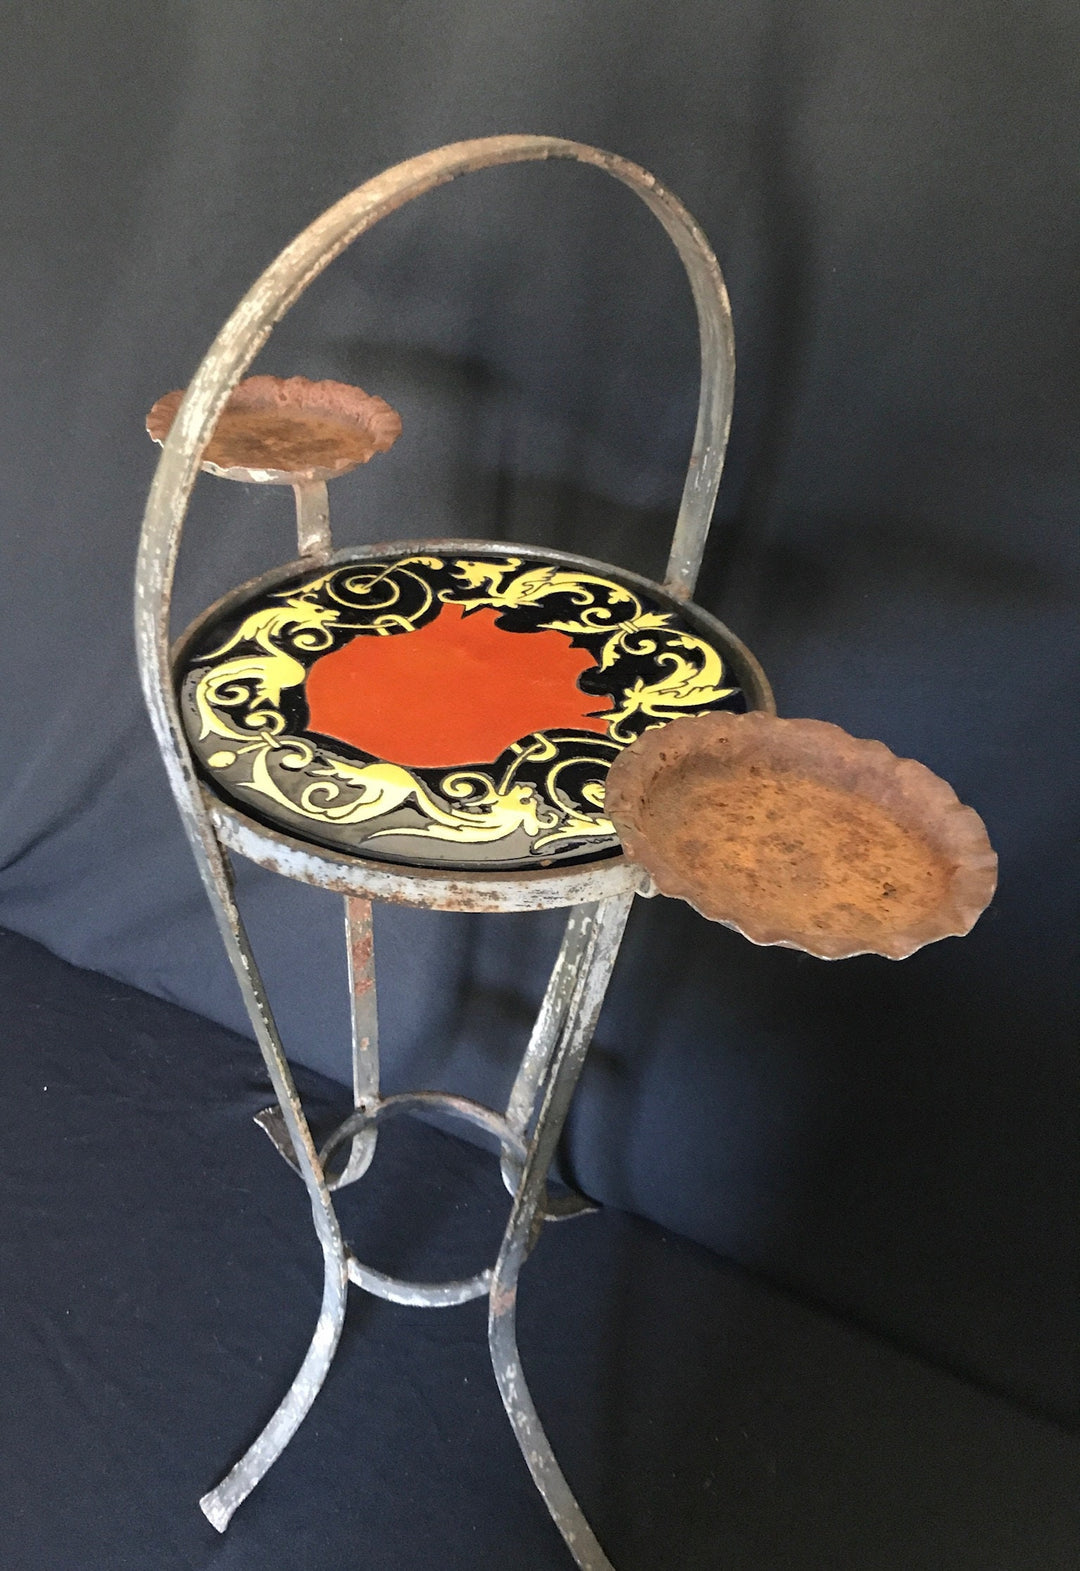 Catalina Cigar Stand & 8” Griffon Tile in Wrought Iron Stand